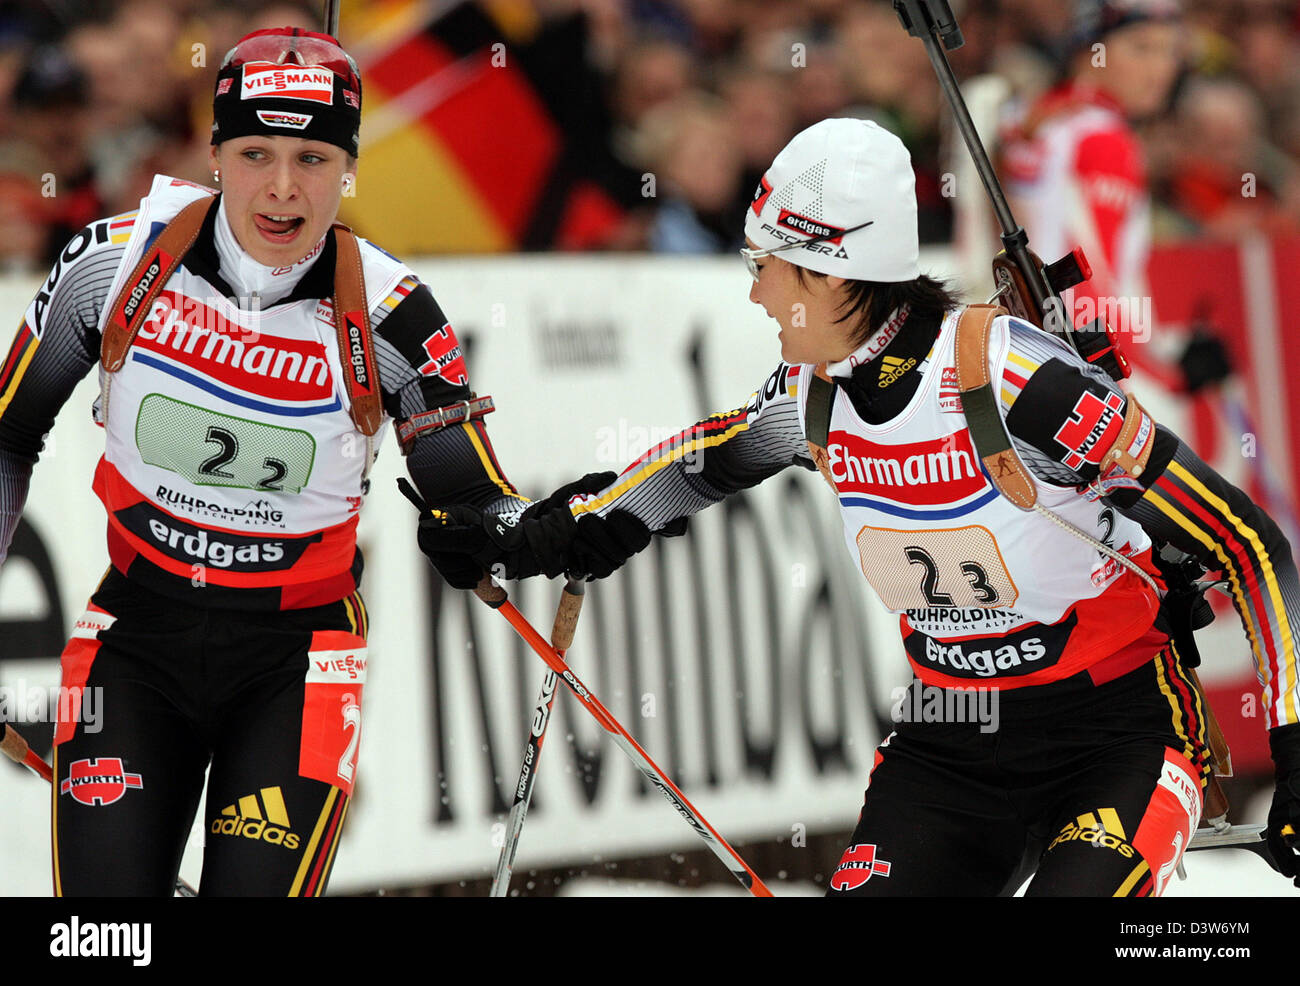 German Simone Denkinger changes over for Magdalena Neuner (L) during the Biathlon World Cup women's 6k relay event in Ruhpolding, Germany, Wednesday, 10 January 2007. Russia produced the finest shooting performance of the season to win the fourth World Cup women's relay of the campaign in Ruhpolding ahead of the German team. Photo: Andreas Gebert Stock Photo